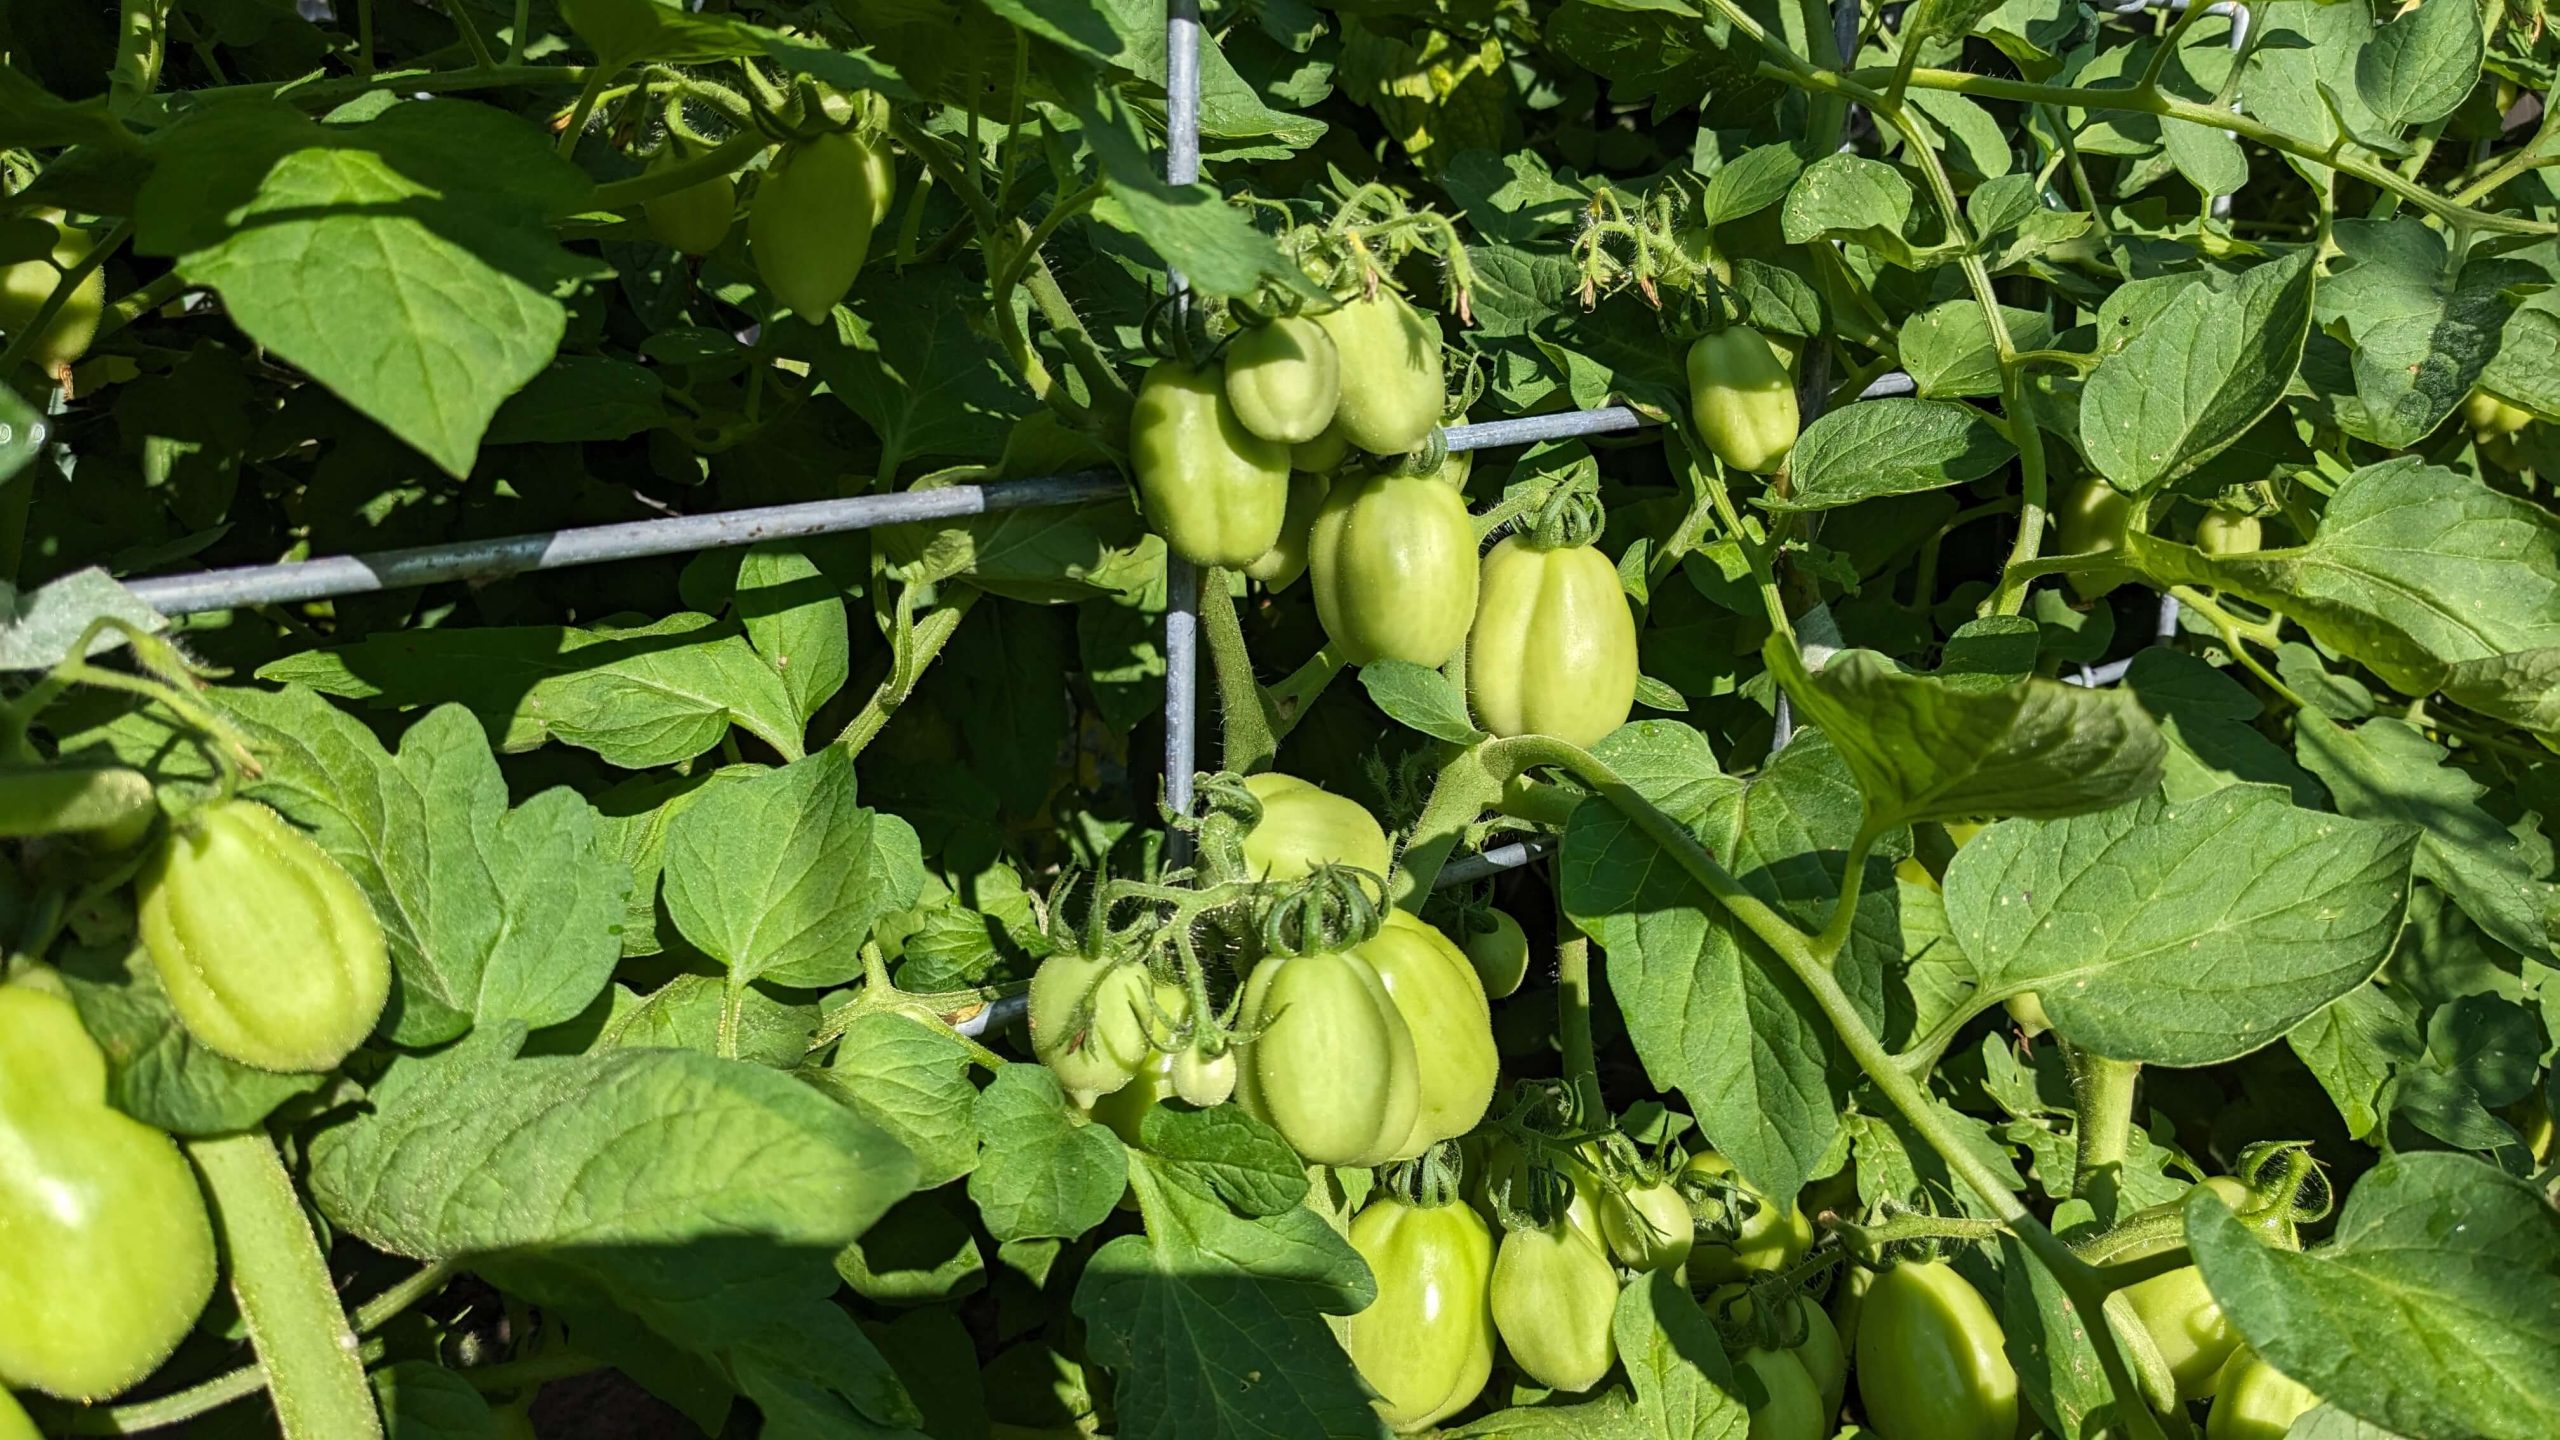 green tomatoes growing on vines